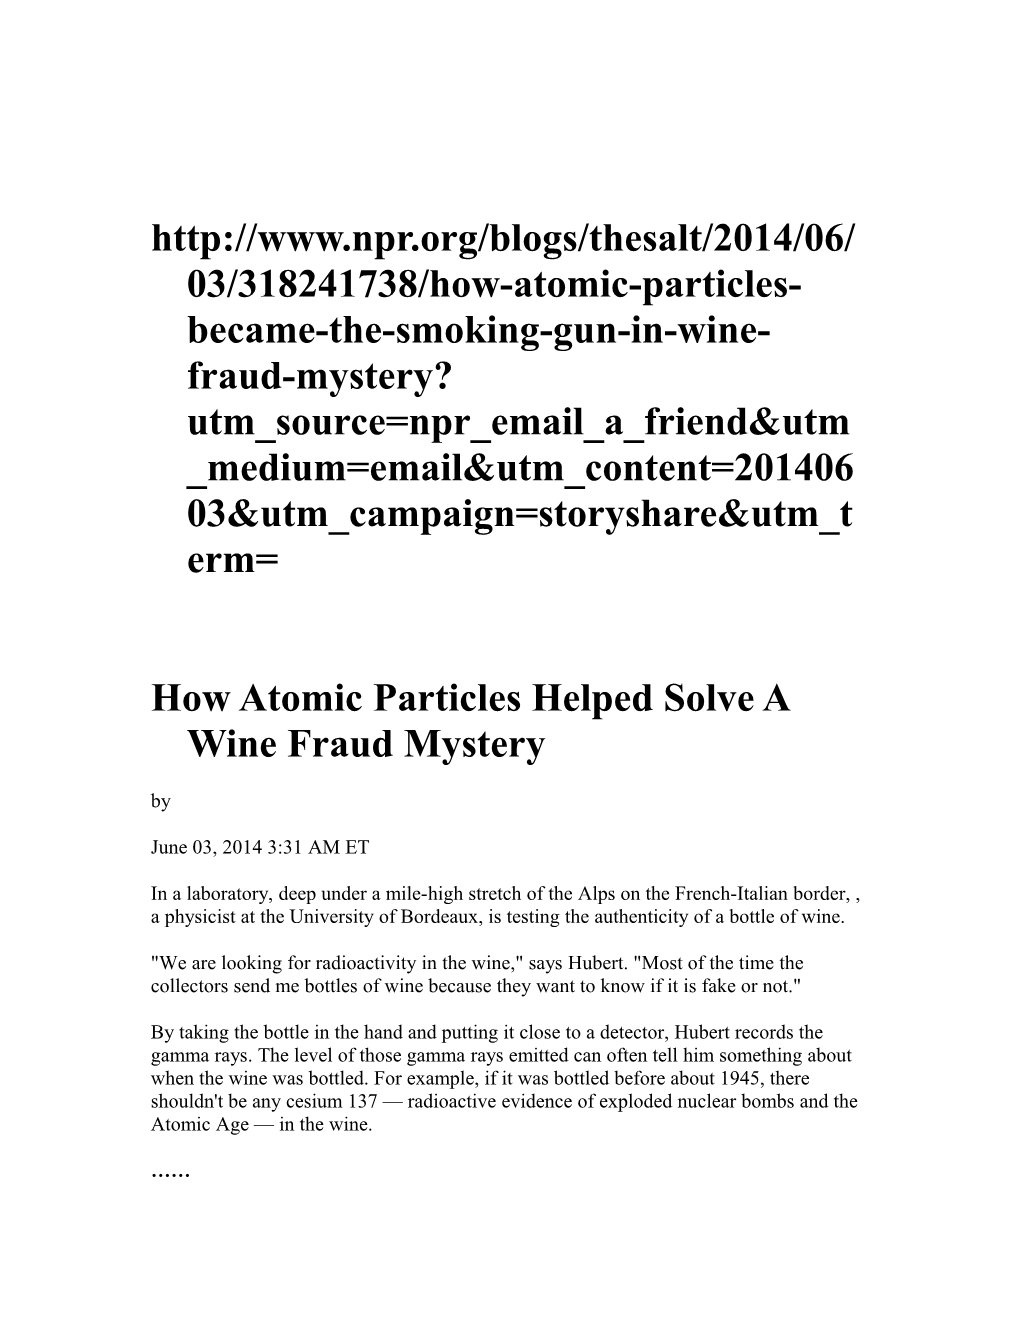 How Atomic Particles Helped Solve a Wine Fraud Mystery